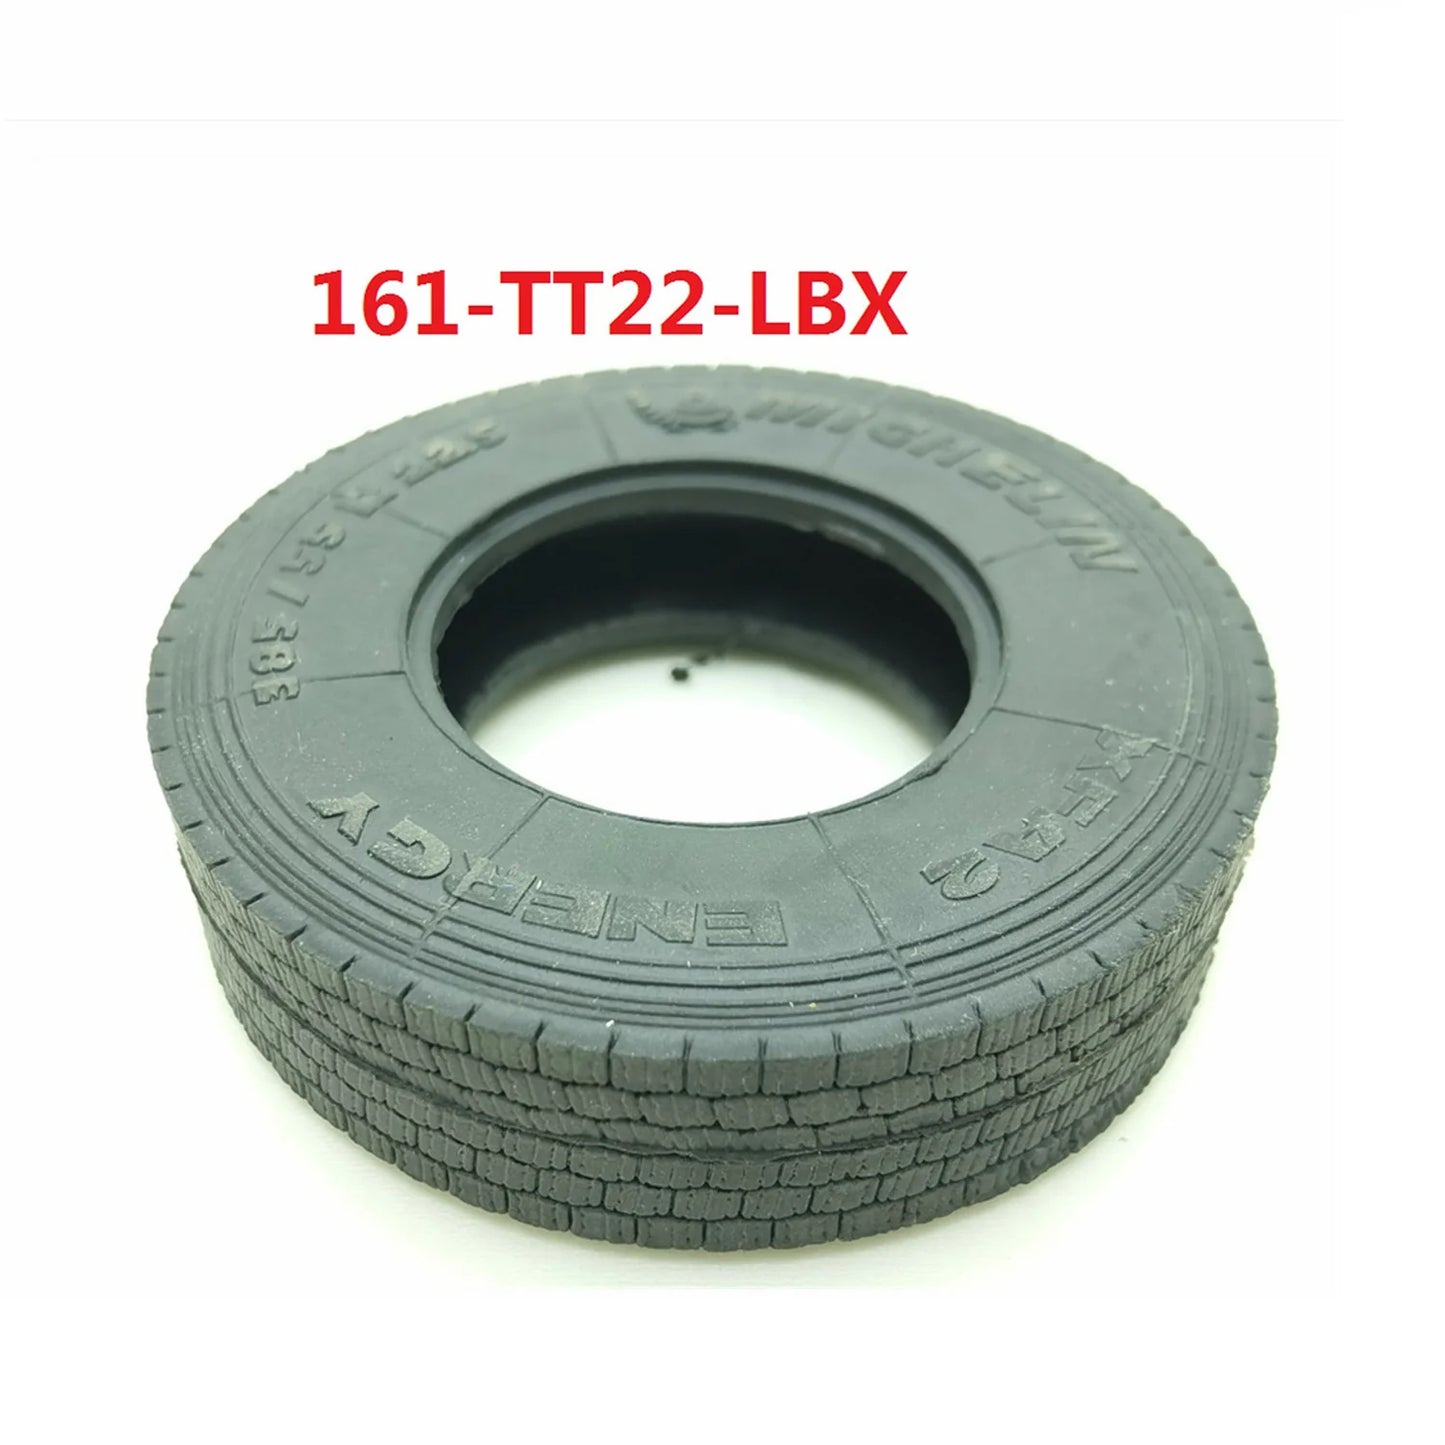 Degree Rubber Tires (pair) for 1/14 scale trucks